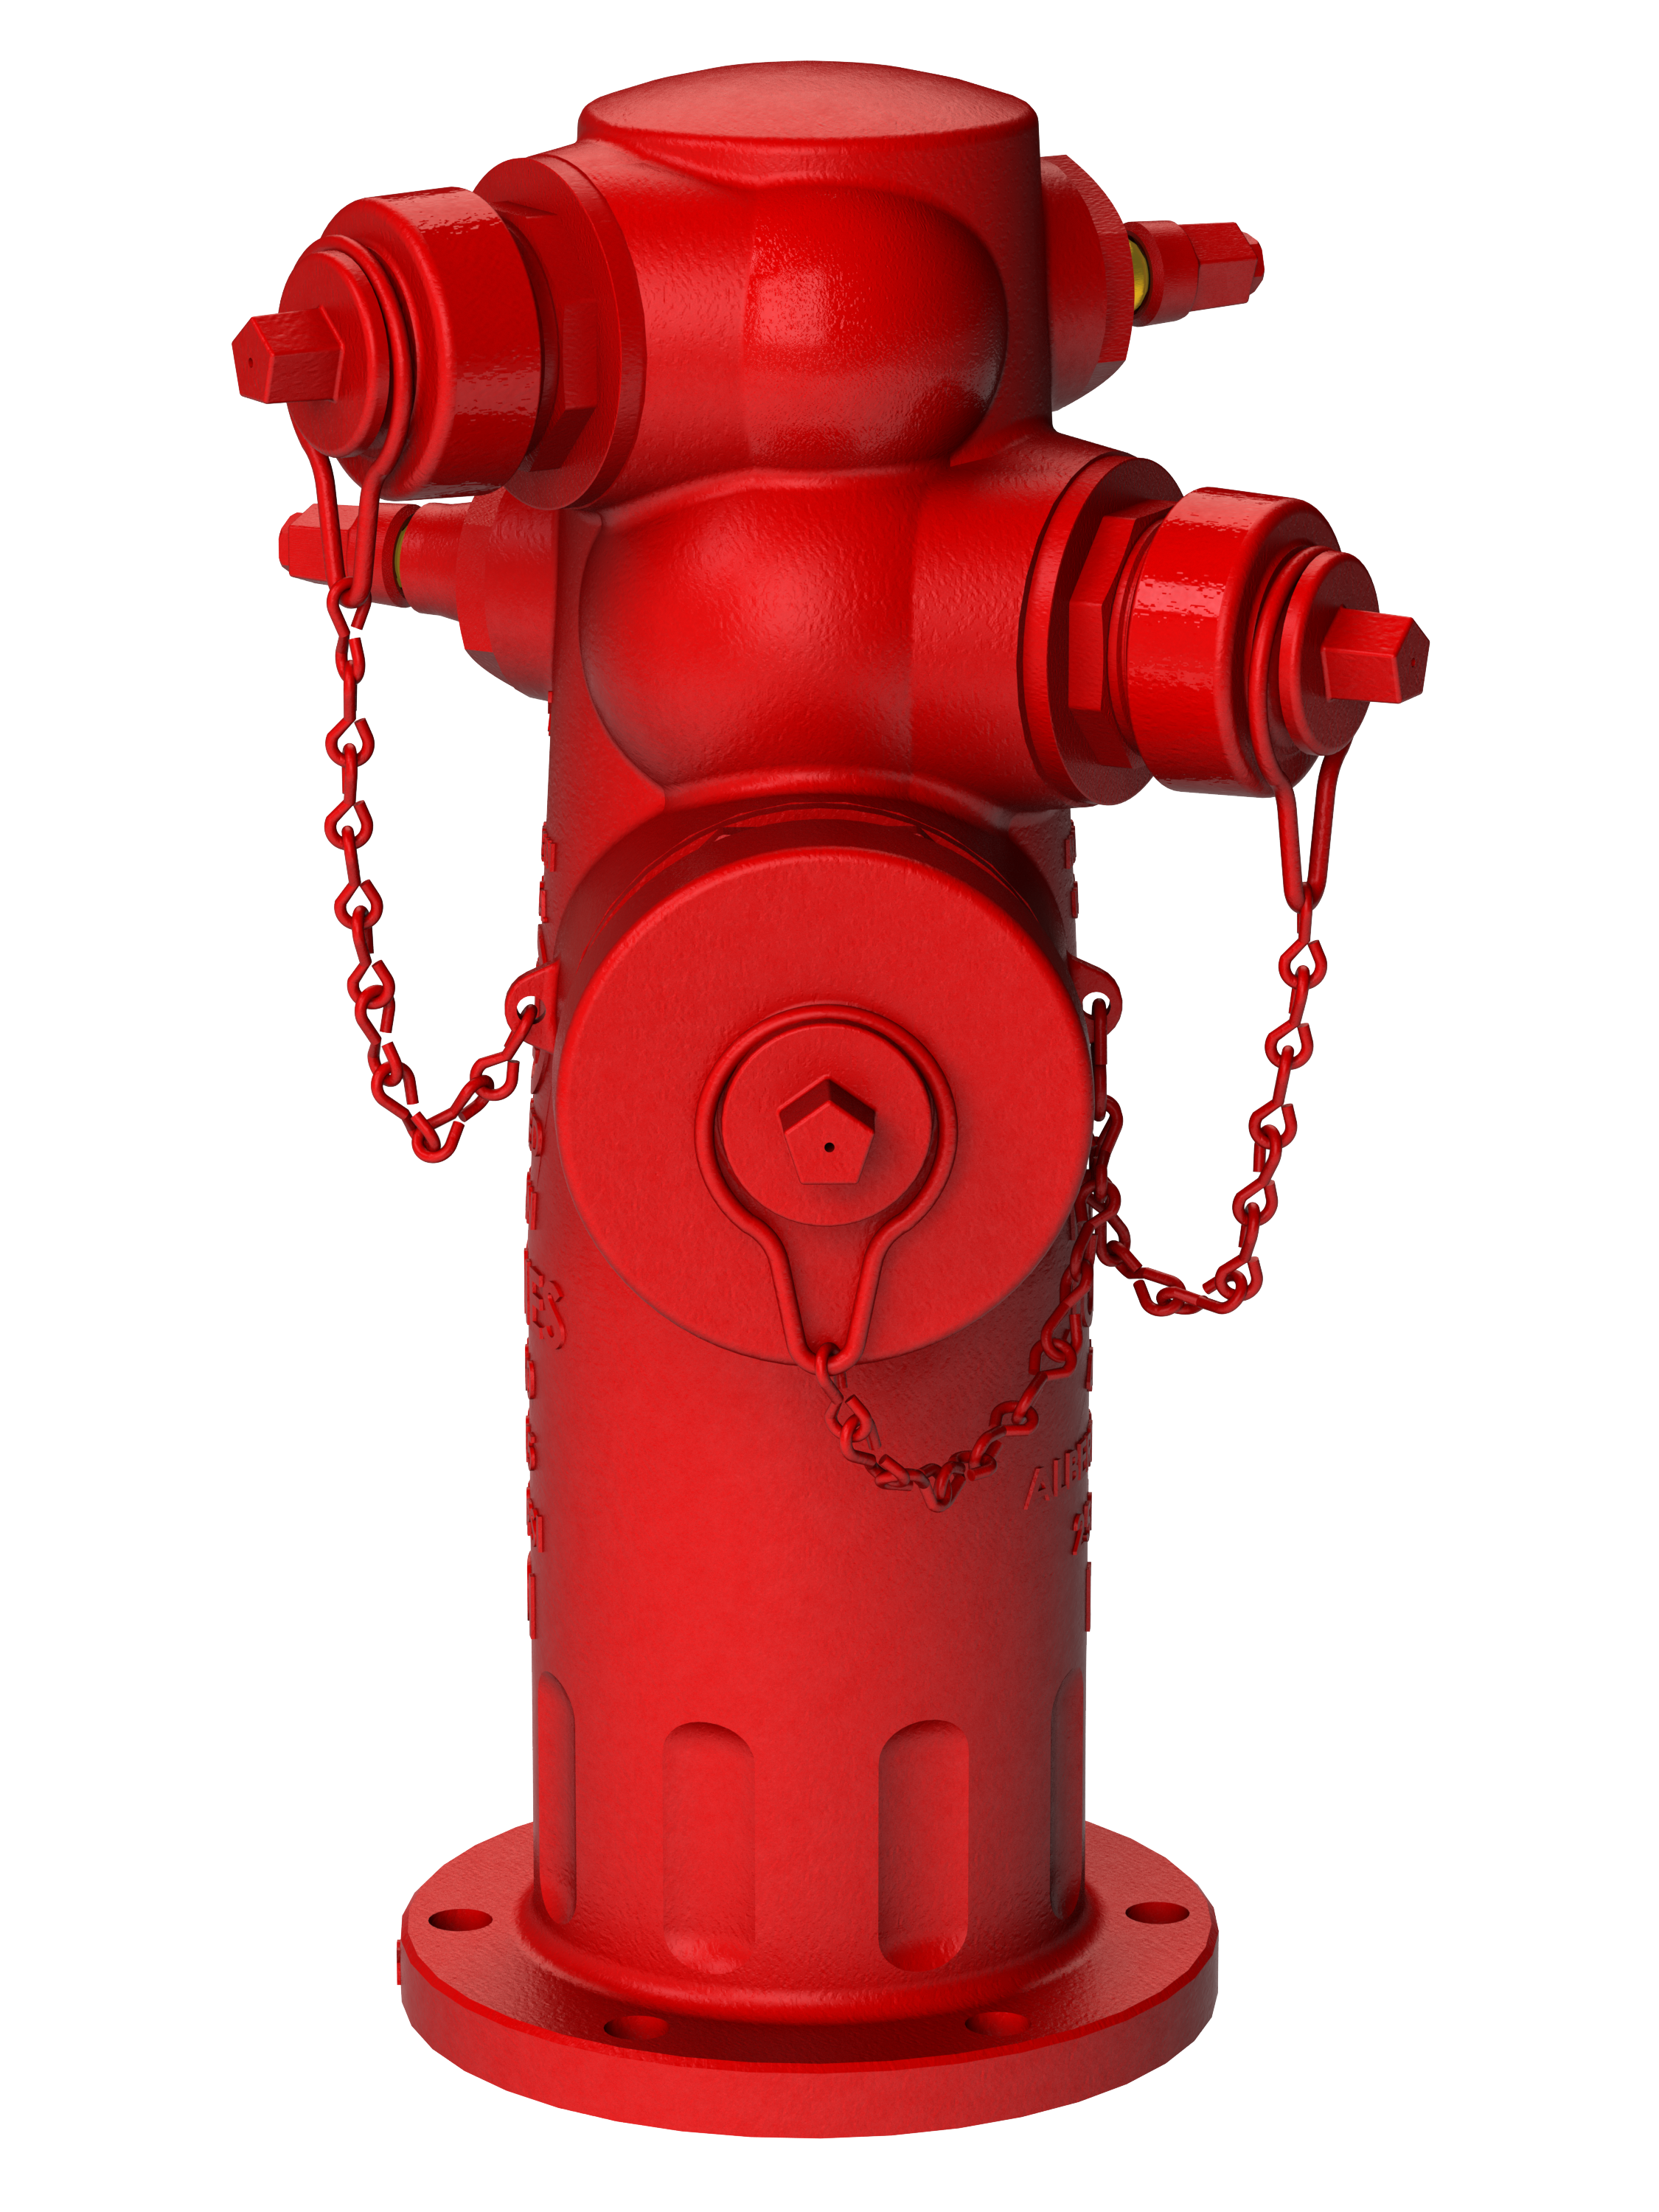 Fire hydrant PNG, Hydrant HD PNG - Free PNG